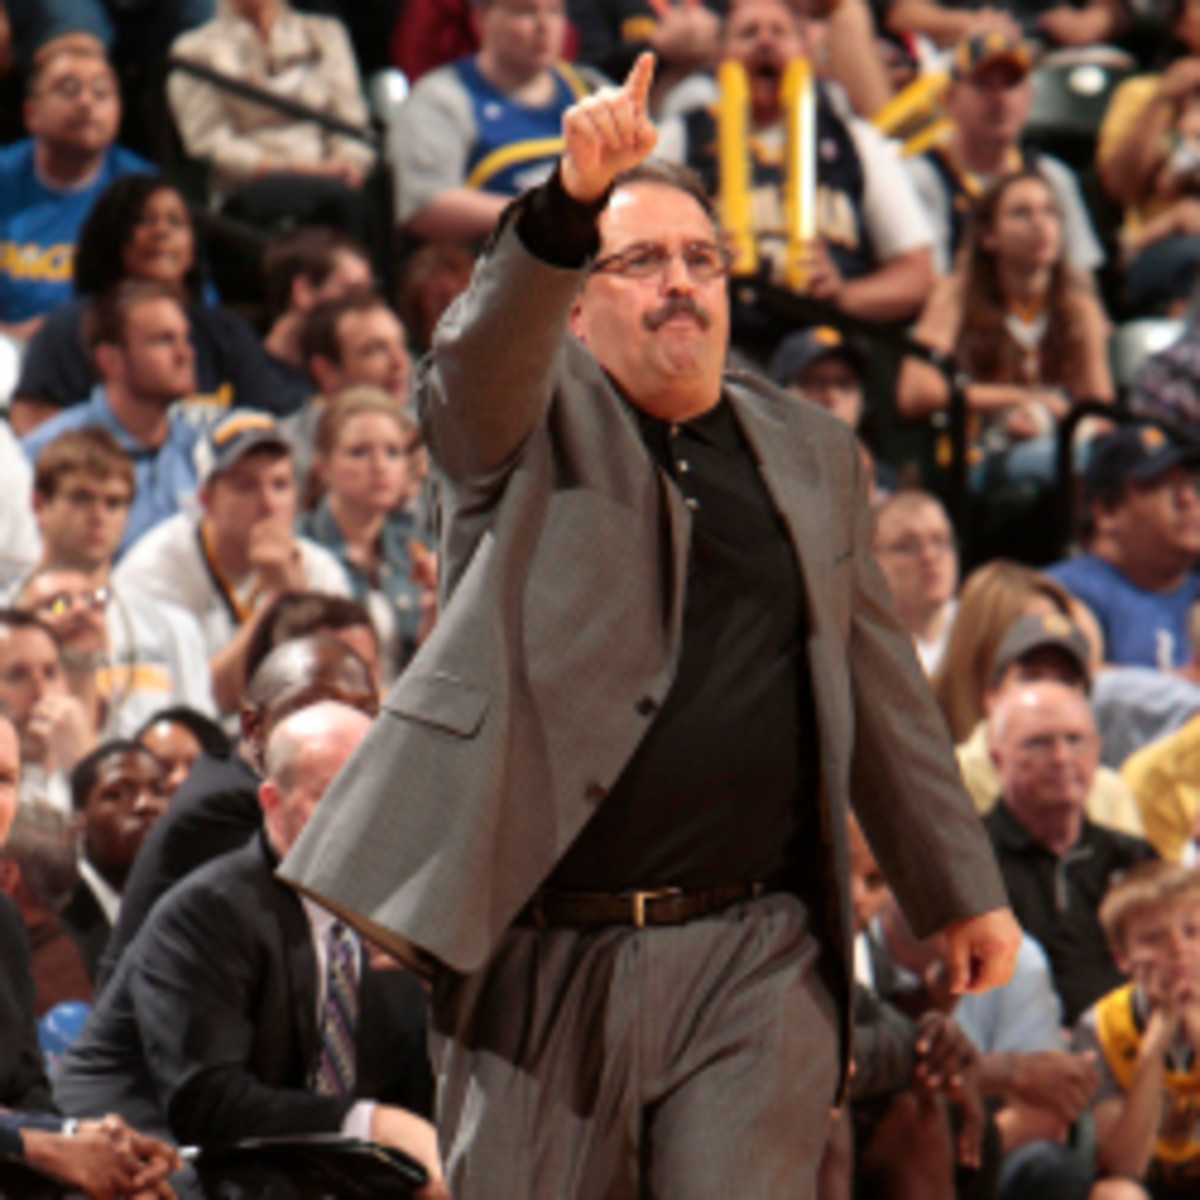 Stan Van Gundy last coached the Orlando Magic in 2011-12 and is now the top candidate for the Milwaukee Bucks' head coaching job. (Ron Hoskins/Getty Images)